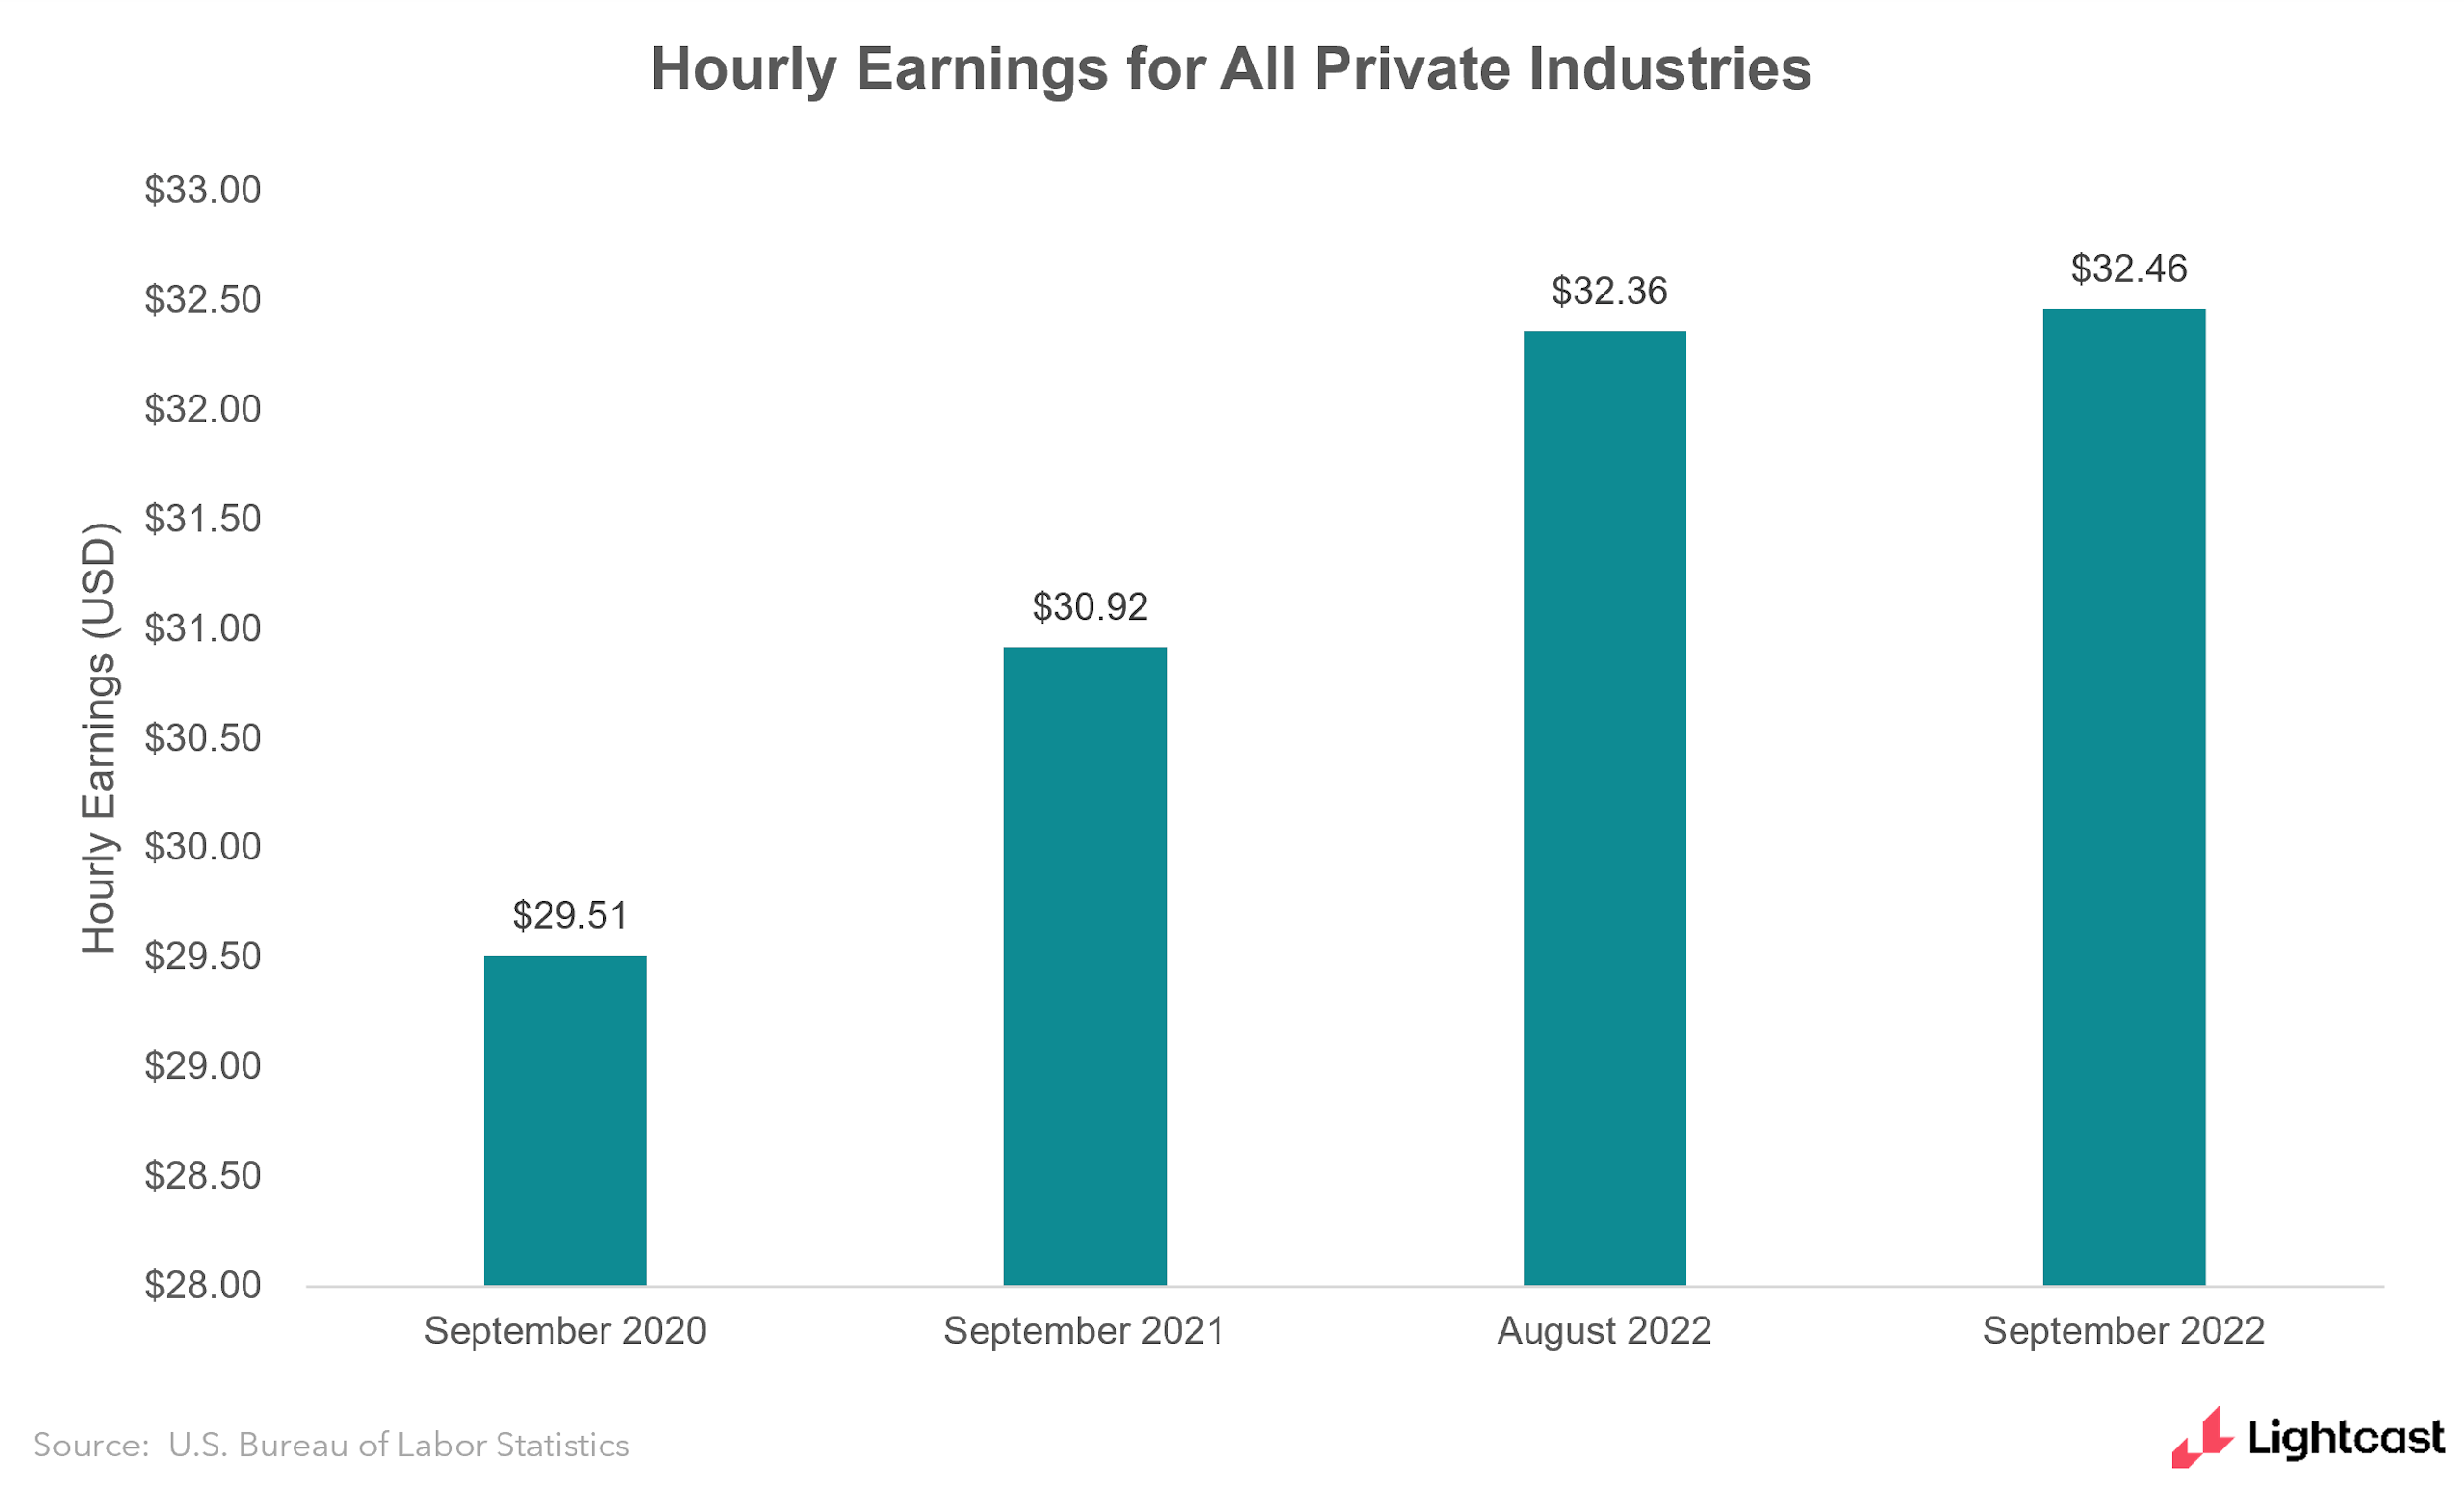 Bar chart showing hourly earnings among all private industries, showing steady increase up to $32.46 in September